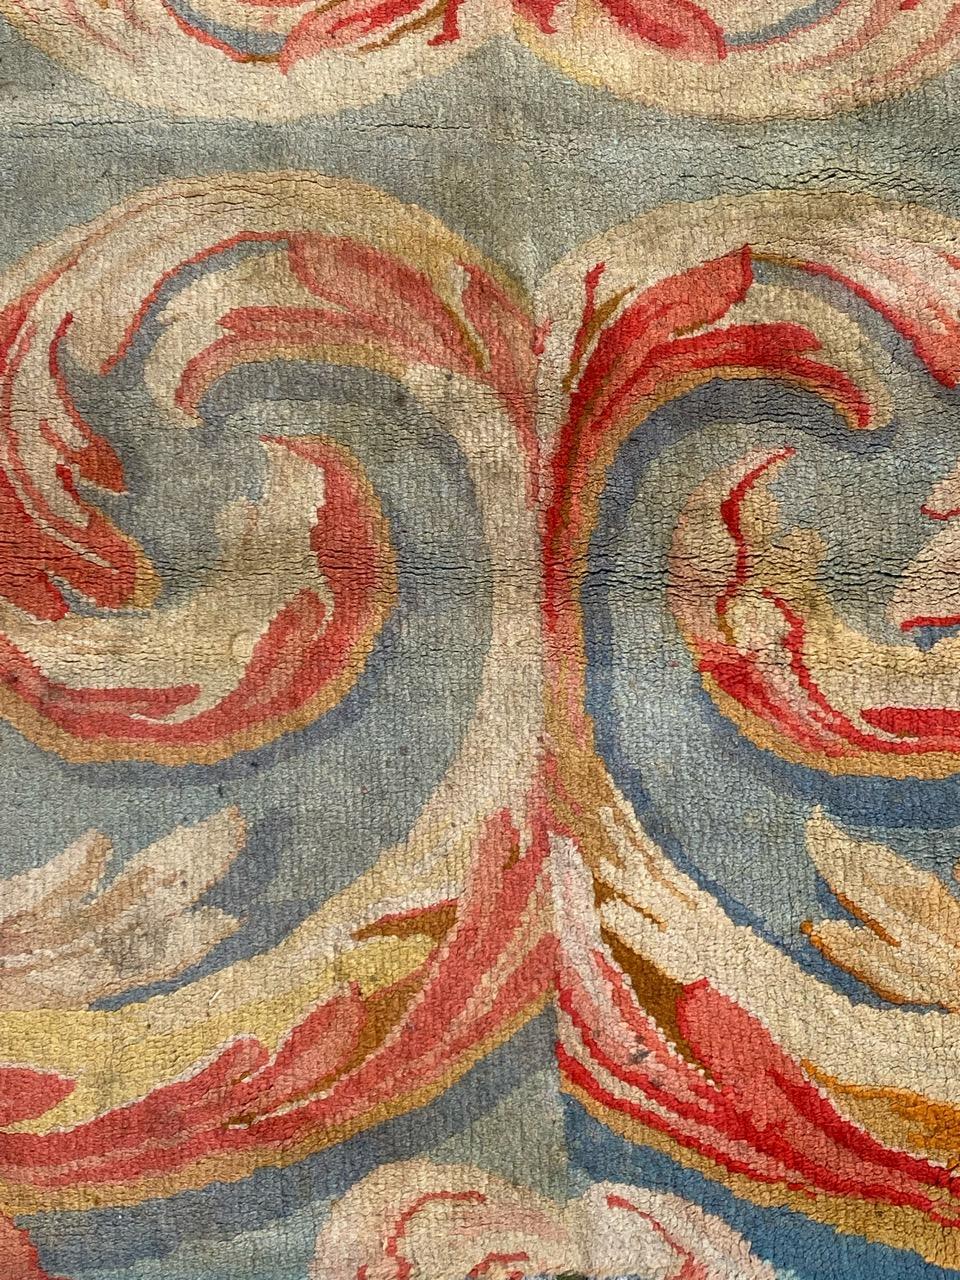 Very beautiful little french savonnerie fragment rug from late 19th century With nice floral design and nice natural colors, entirely hand knotted with wool velvet on cotton foundation.